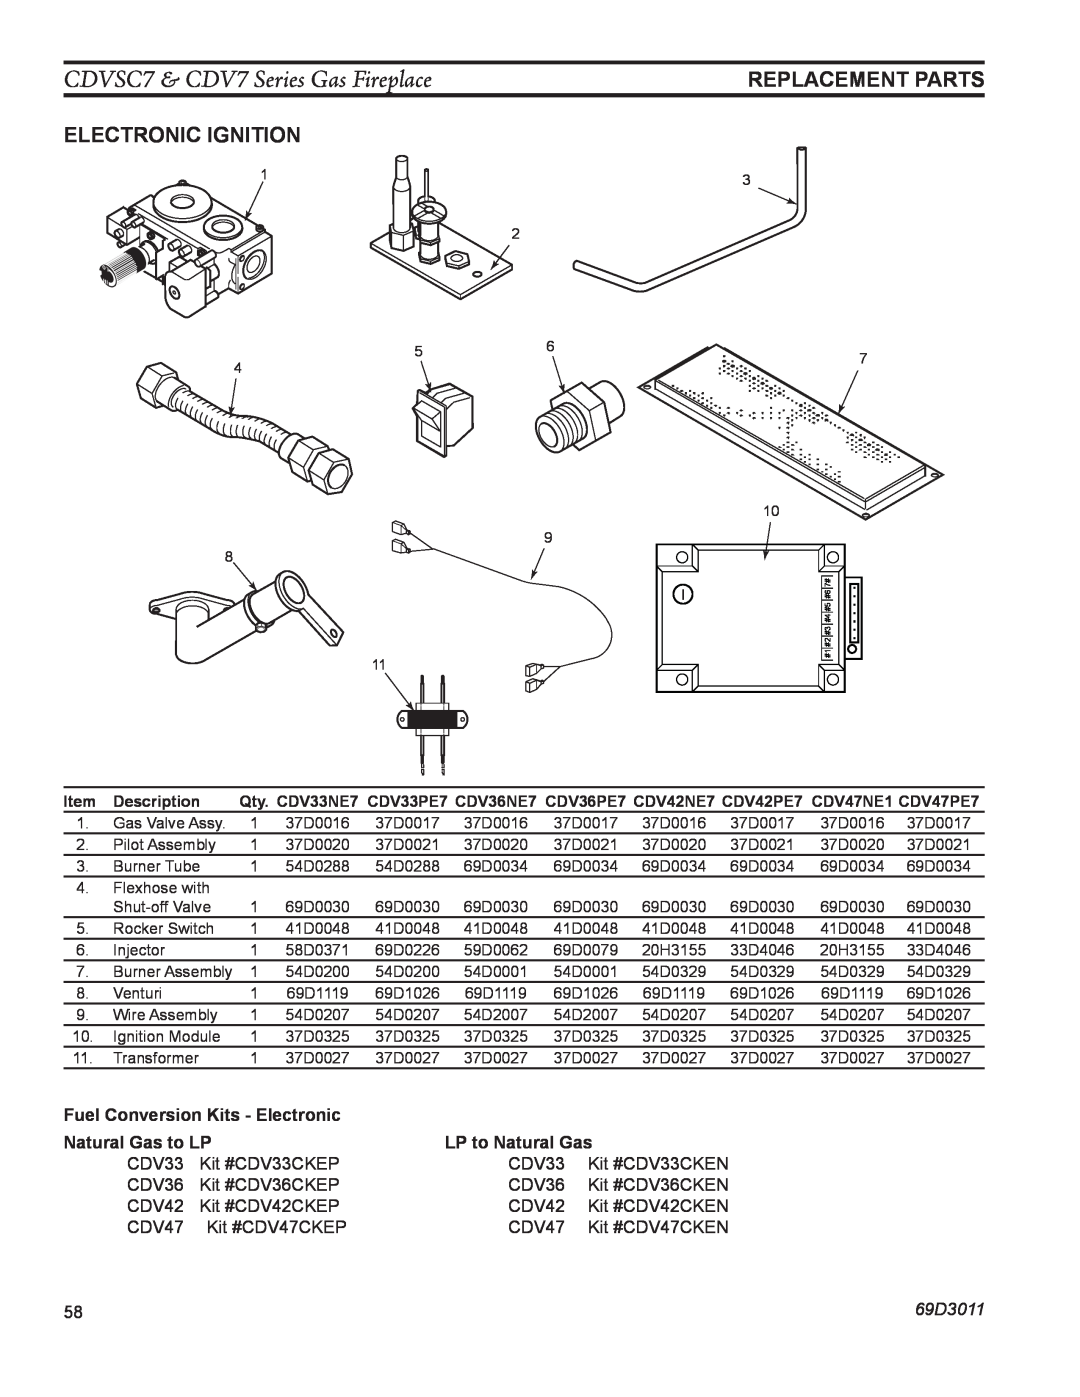 Monessen Hearth Electronic Ignition, Replacement Parts, CDVSC7 & CDV7 Series Gas Fireplace, Natural Gas to LP, 69D3011 